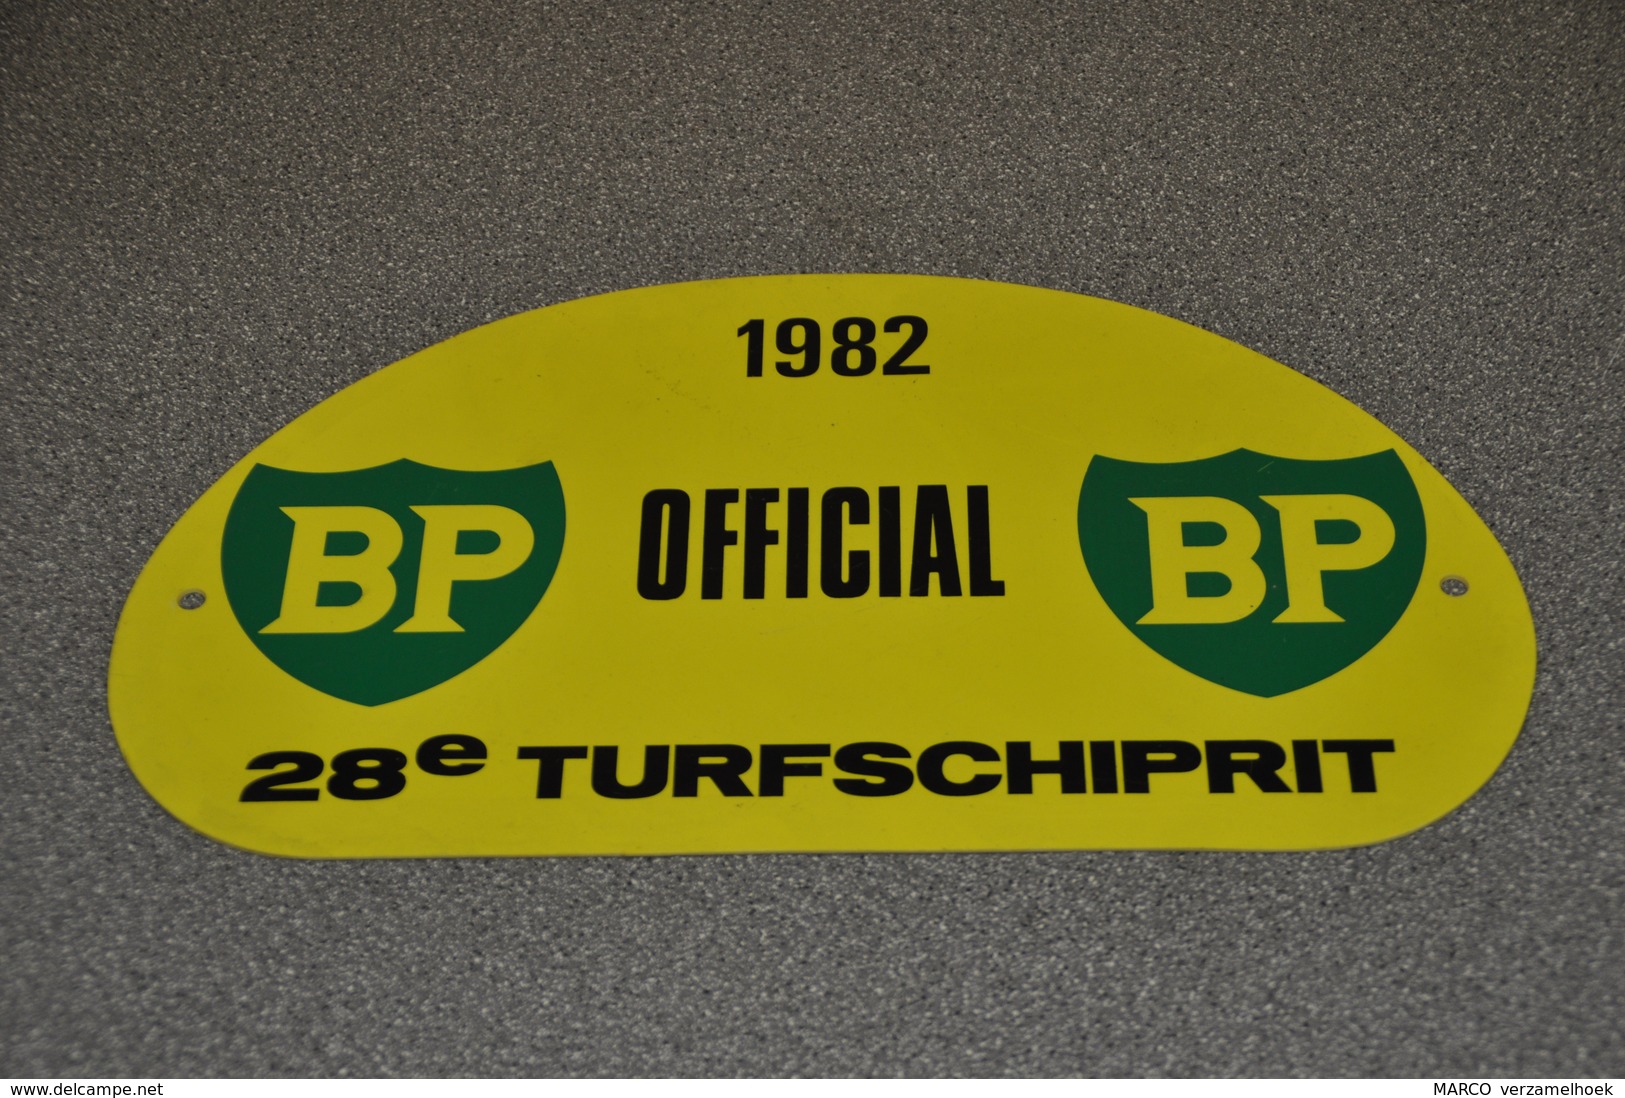 Rally Plaat-rallye Plaque Plastic: 28e Turfschiprit Breda 1982 OFFICIAL BP - Rally-affiches